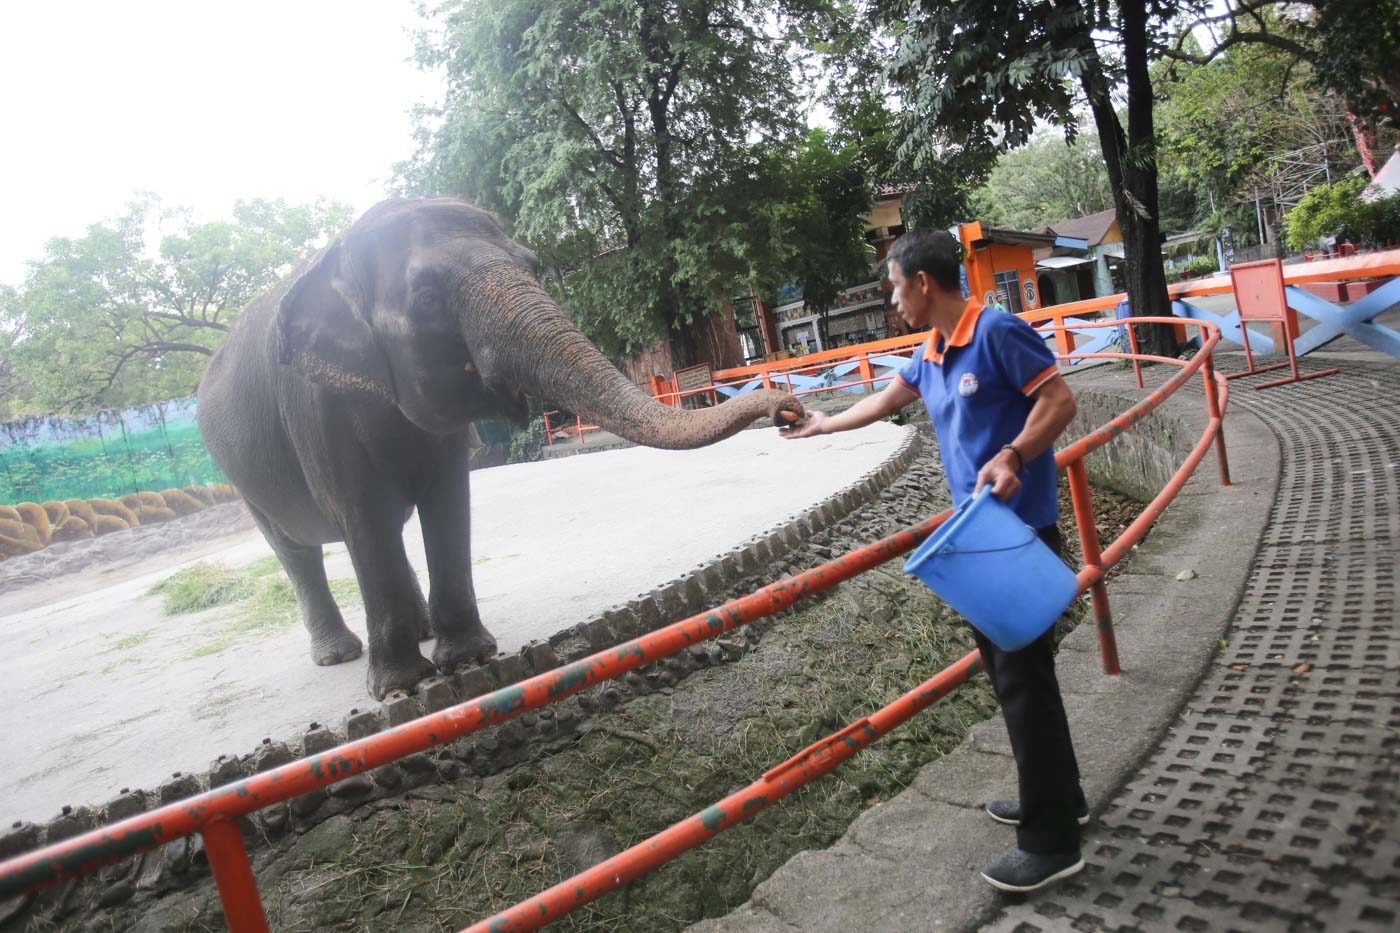 FAMOUS RESIDENT. Mali, a 43-year-old Asian elephant which started living in Manila Zoo at age 3, is fed by a zoo employee without the usual gawkers on January 23, 2019. Photo by Inoue Jaena/Rappler  